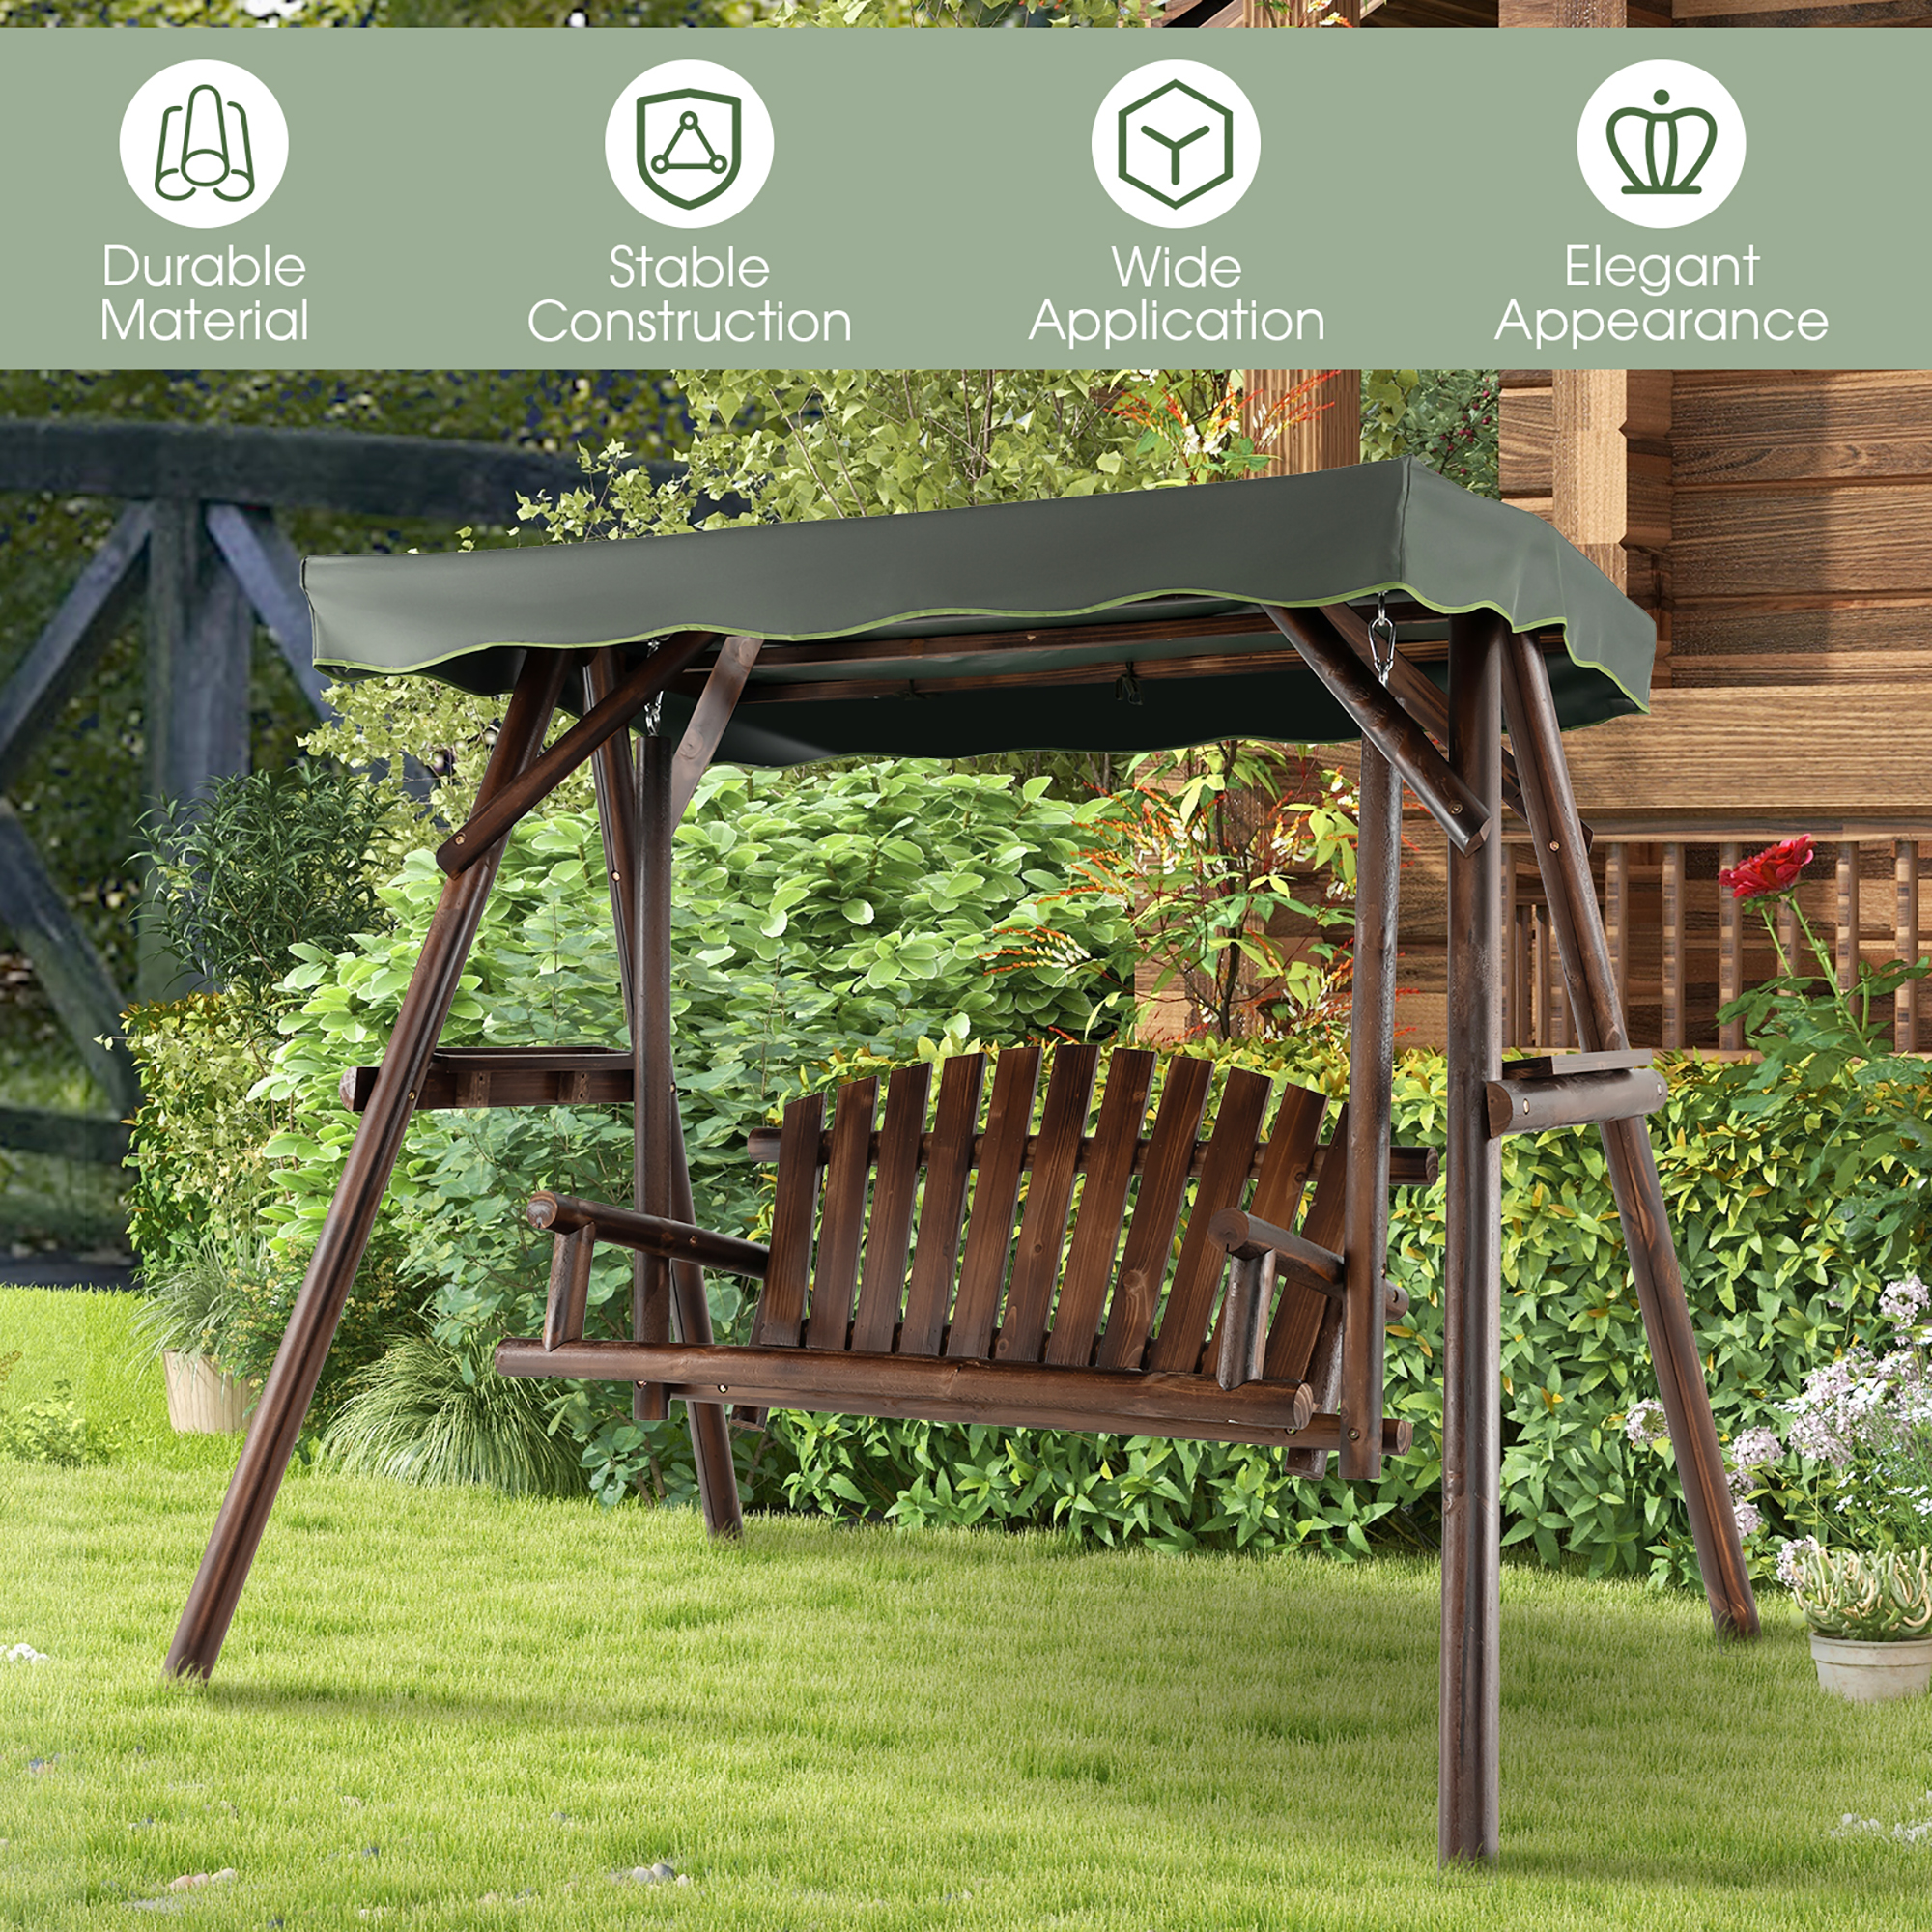 Costway 2 Person Wooden Garden Swing Bench Chair w/ Adjustable Canopy for Garden Porch